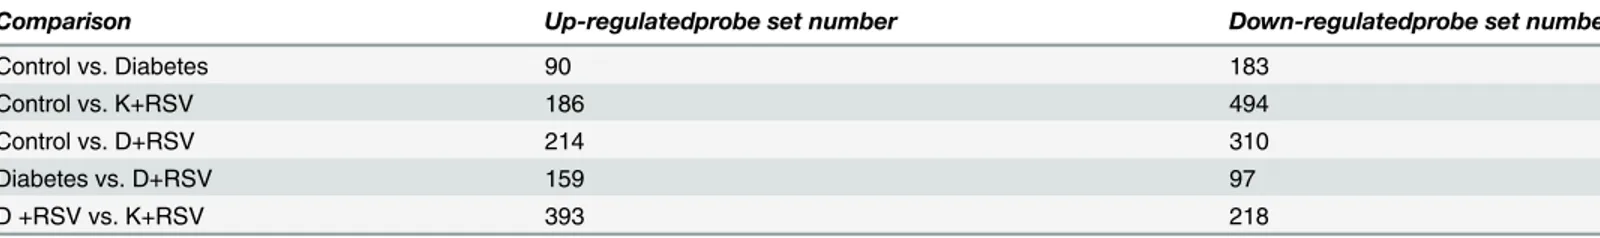 Table 2. Summary of up- and down-regulated probe set numbers.